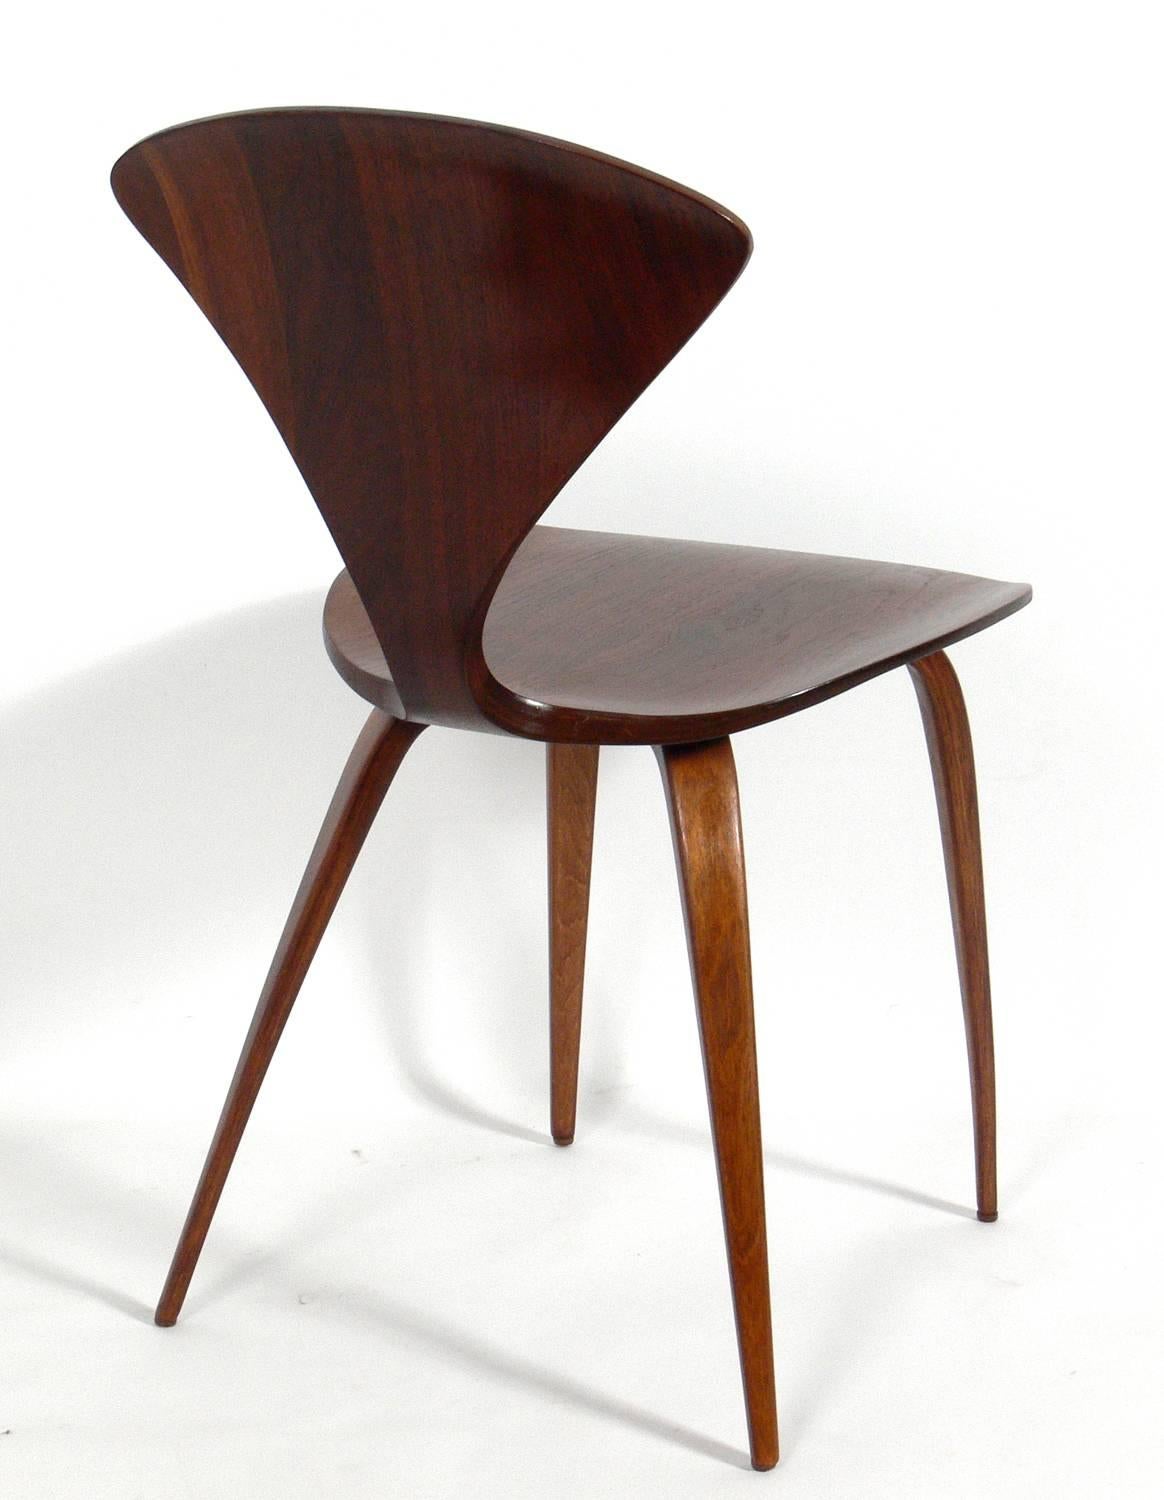 Mid-20th Century Set of 12 Sculptural Dining Chairs by Norman Cherner for Plycraft